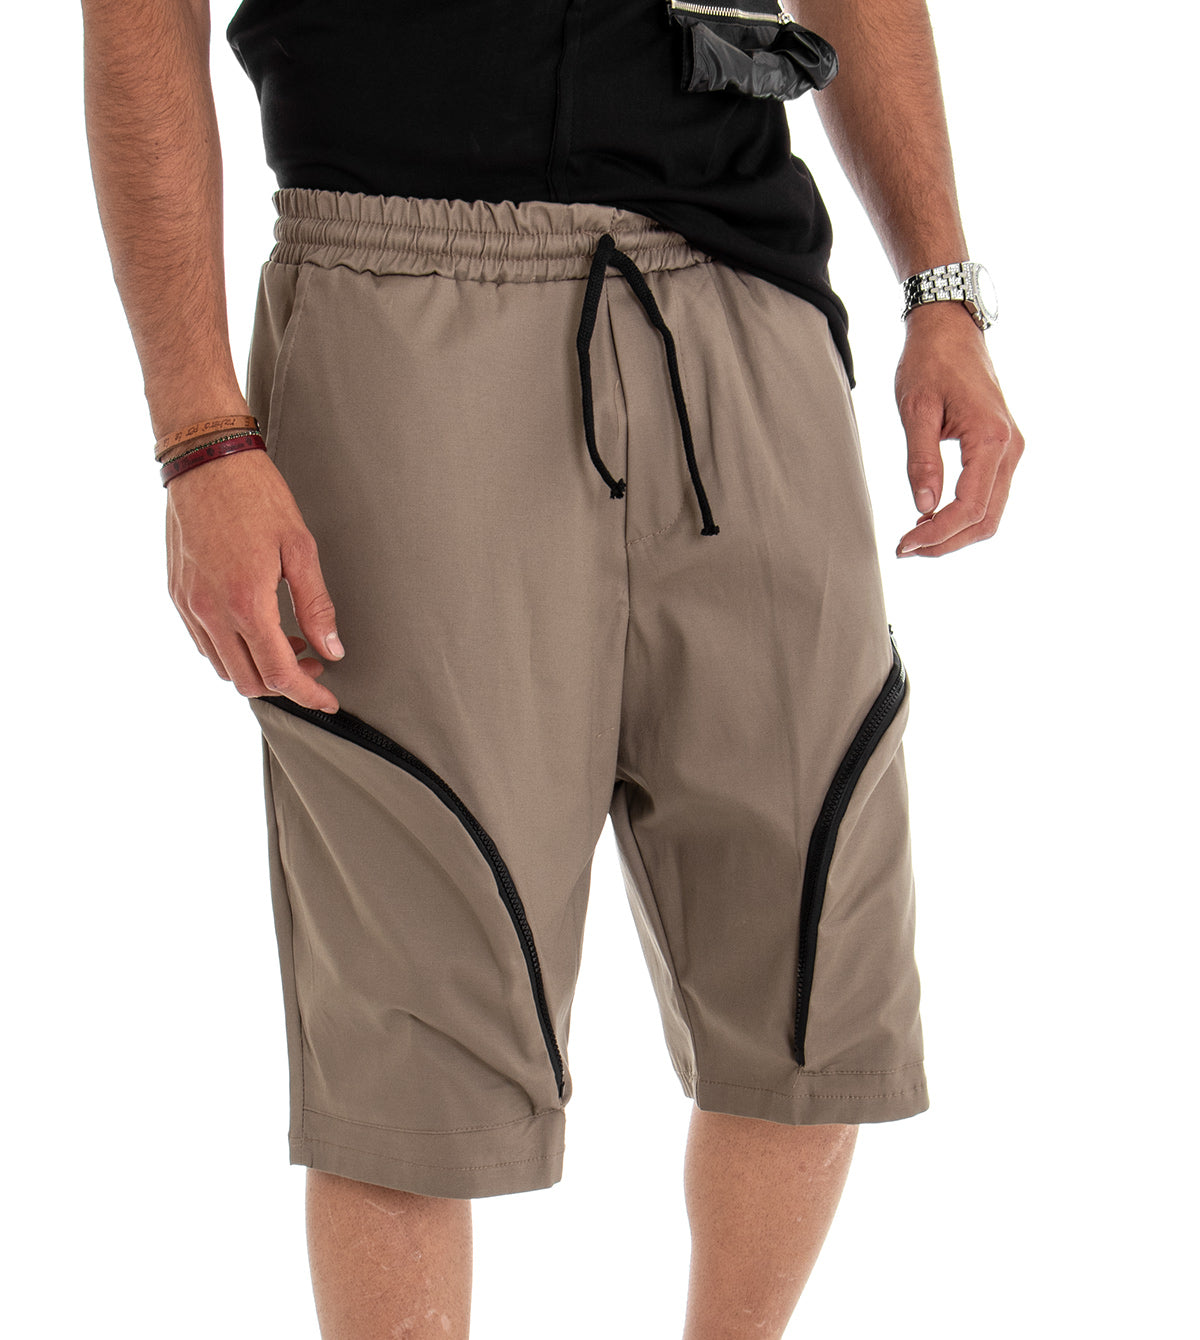 Bermuda Short Men's Shorts Solid Color Over Mud GIOSAL-PC1476A